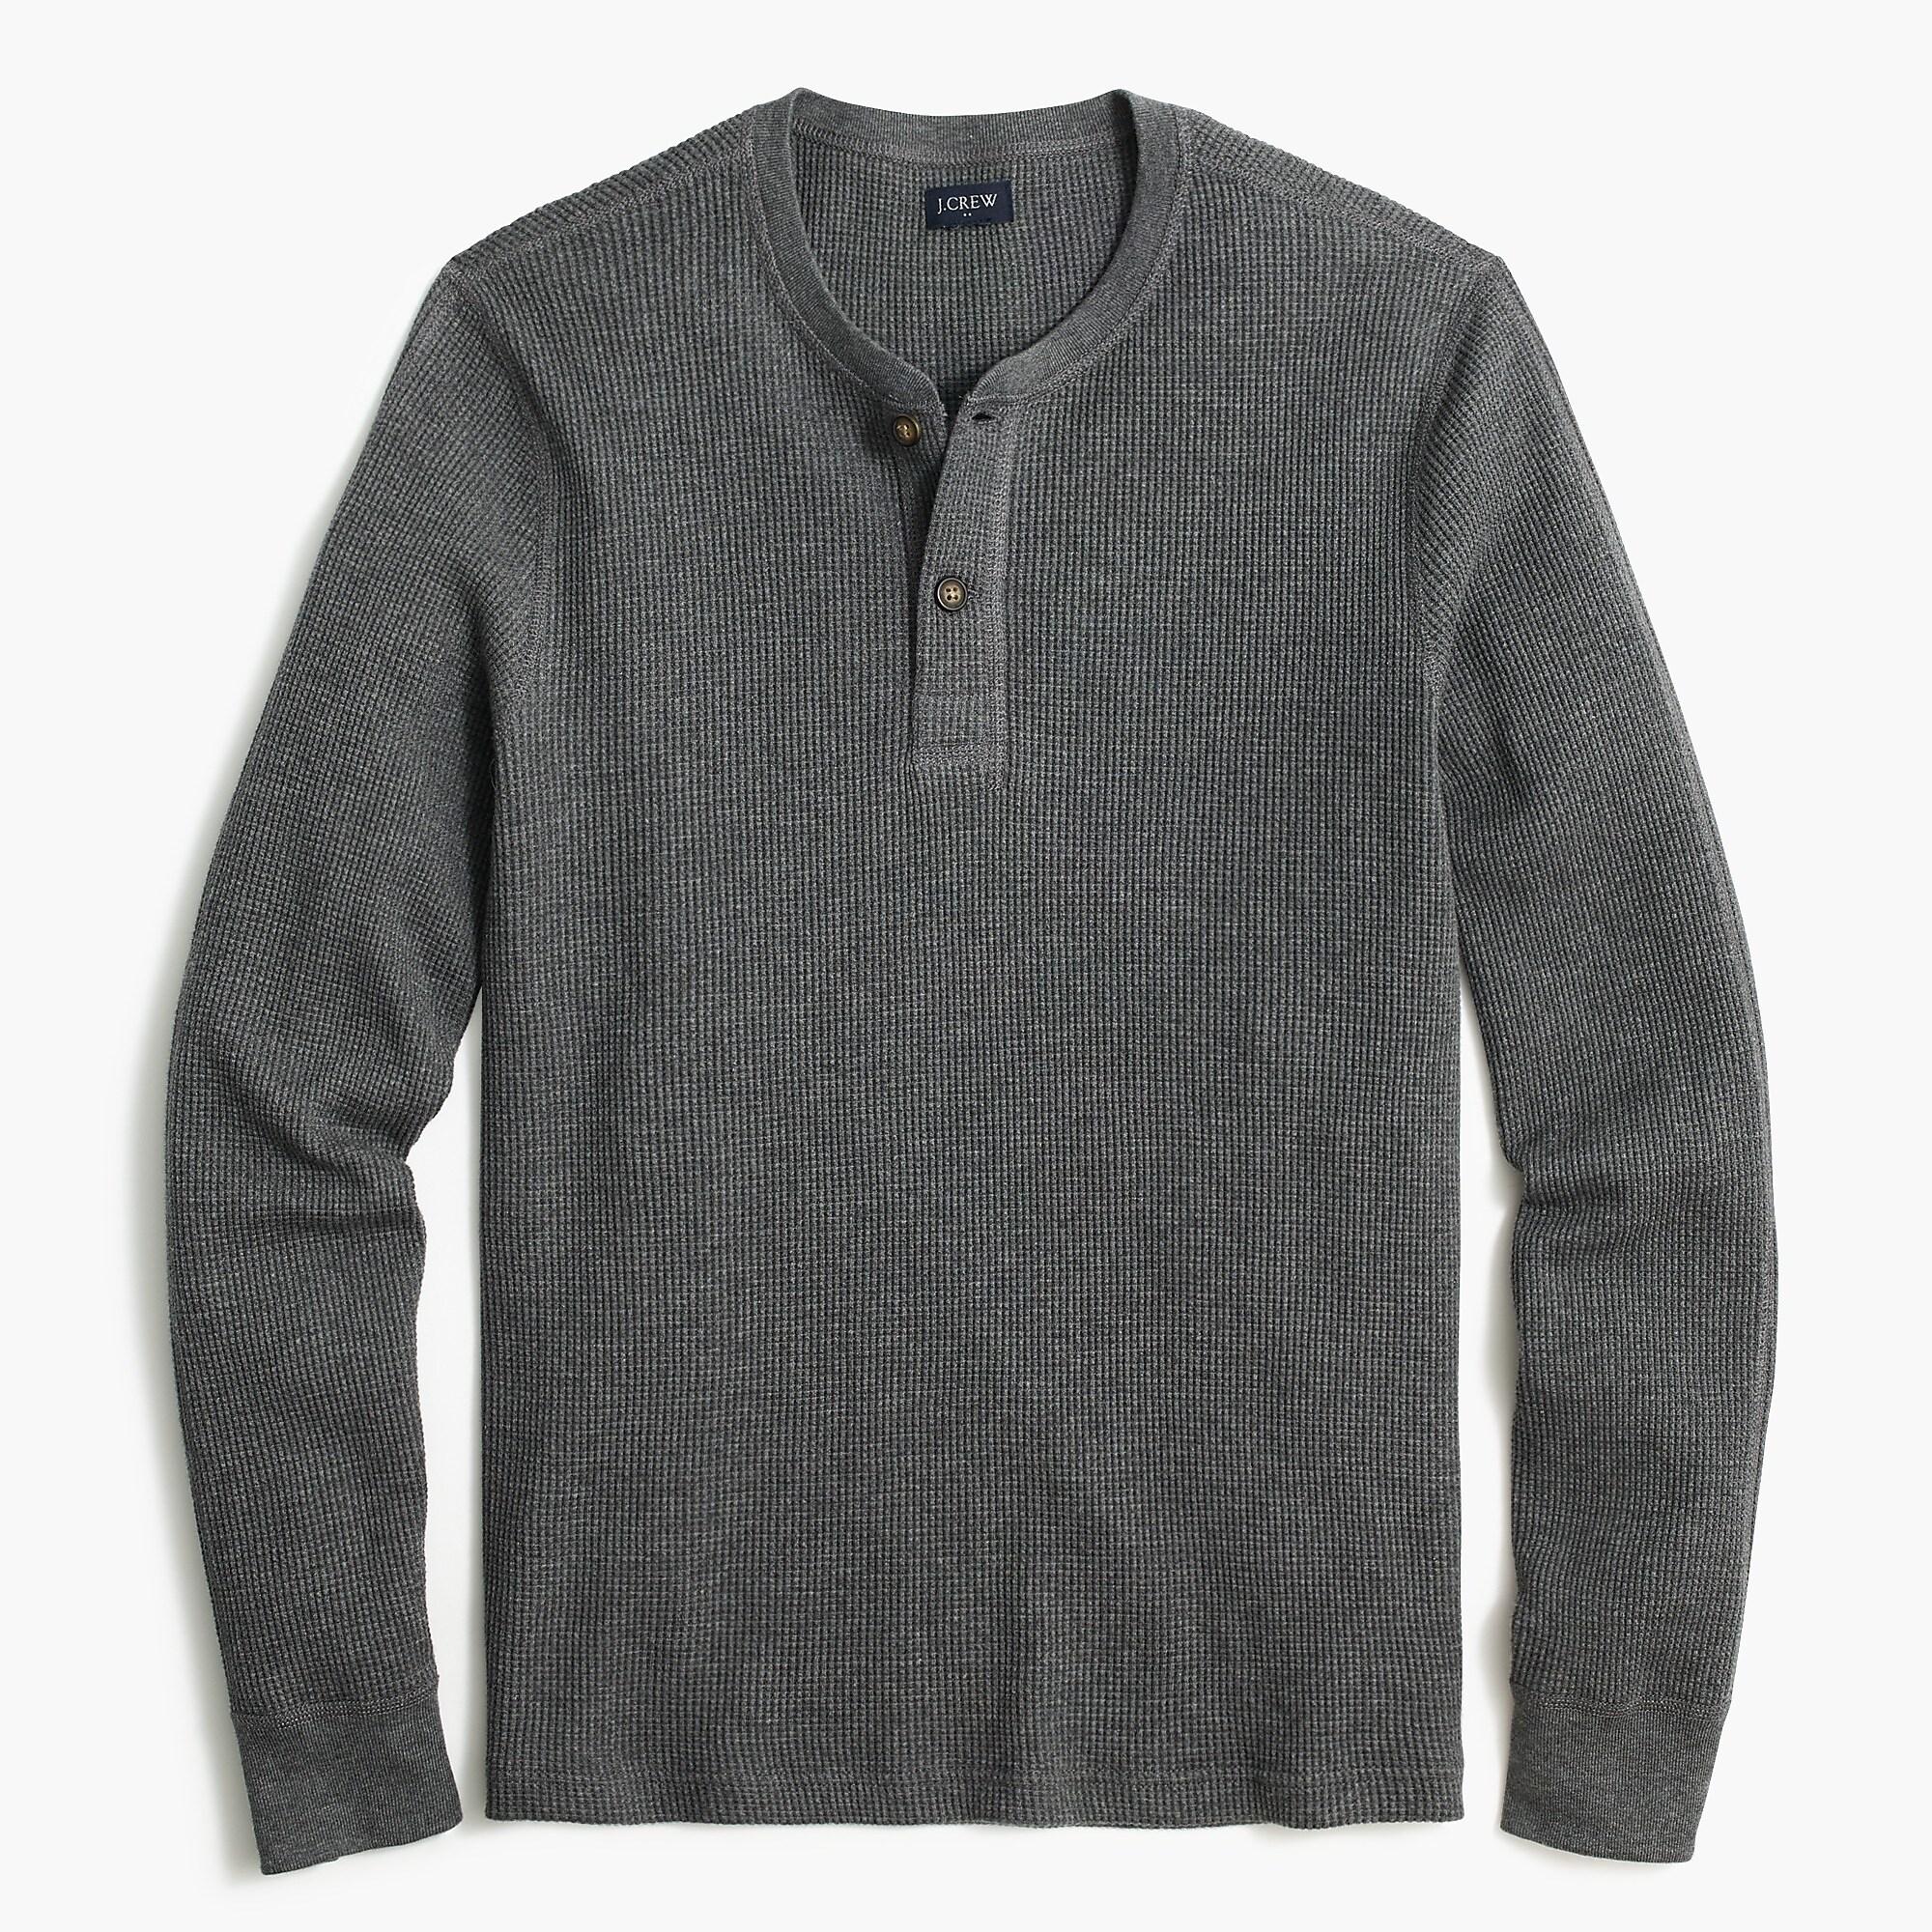 J.Crew Cotton Long-sleeve Thermal Henley in Gray for Men - Lyst